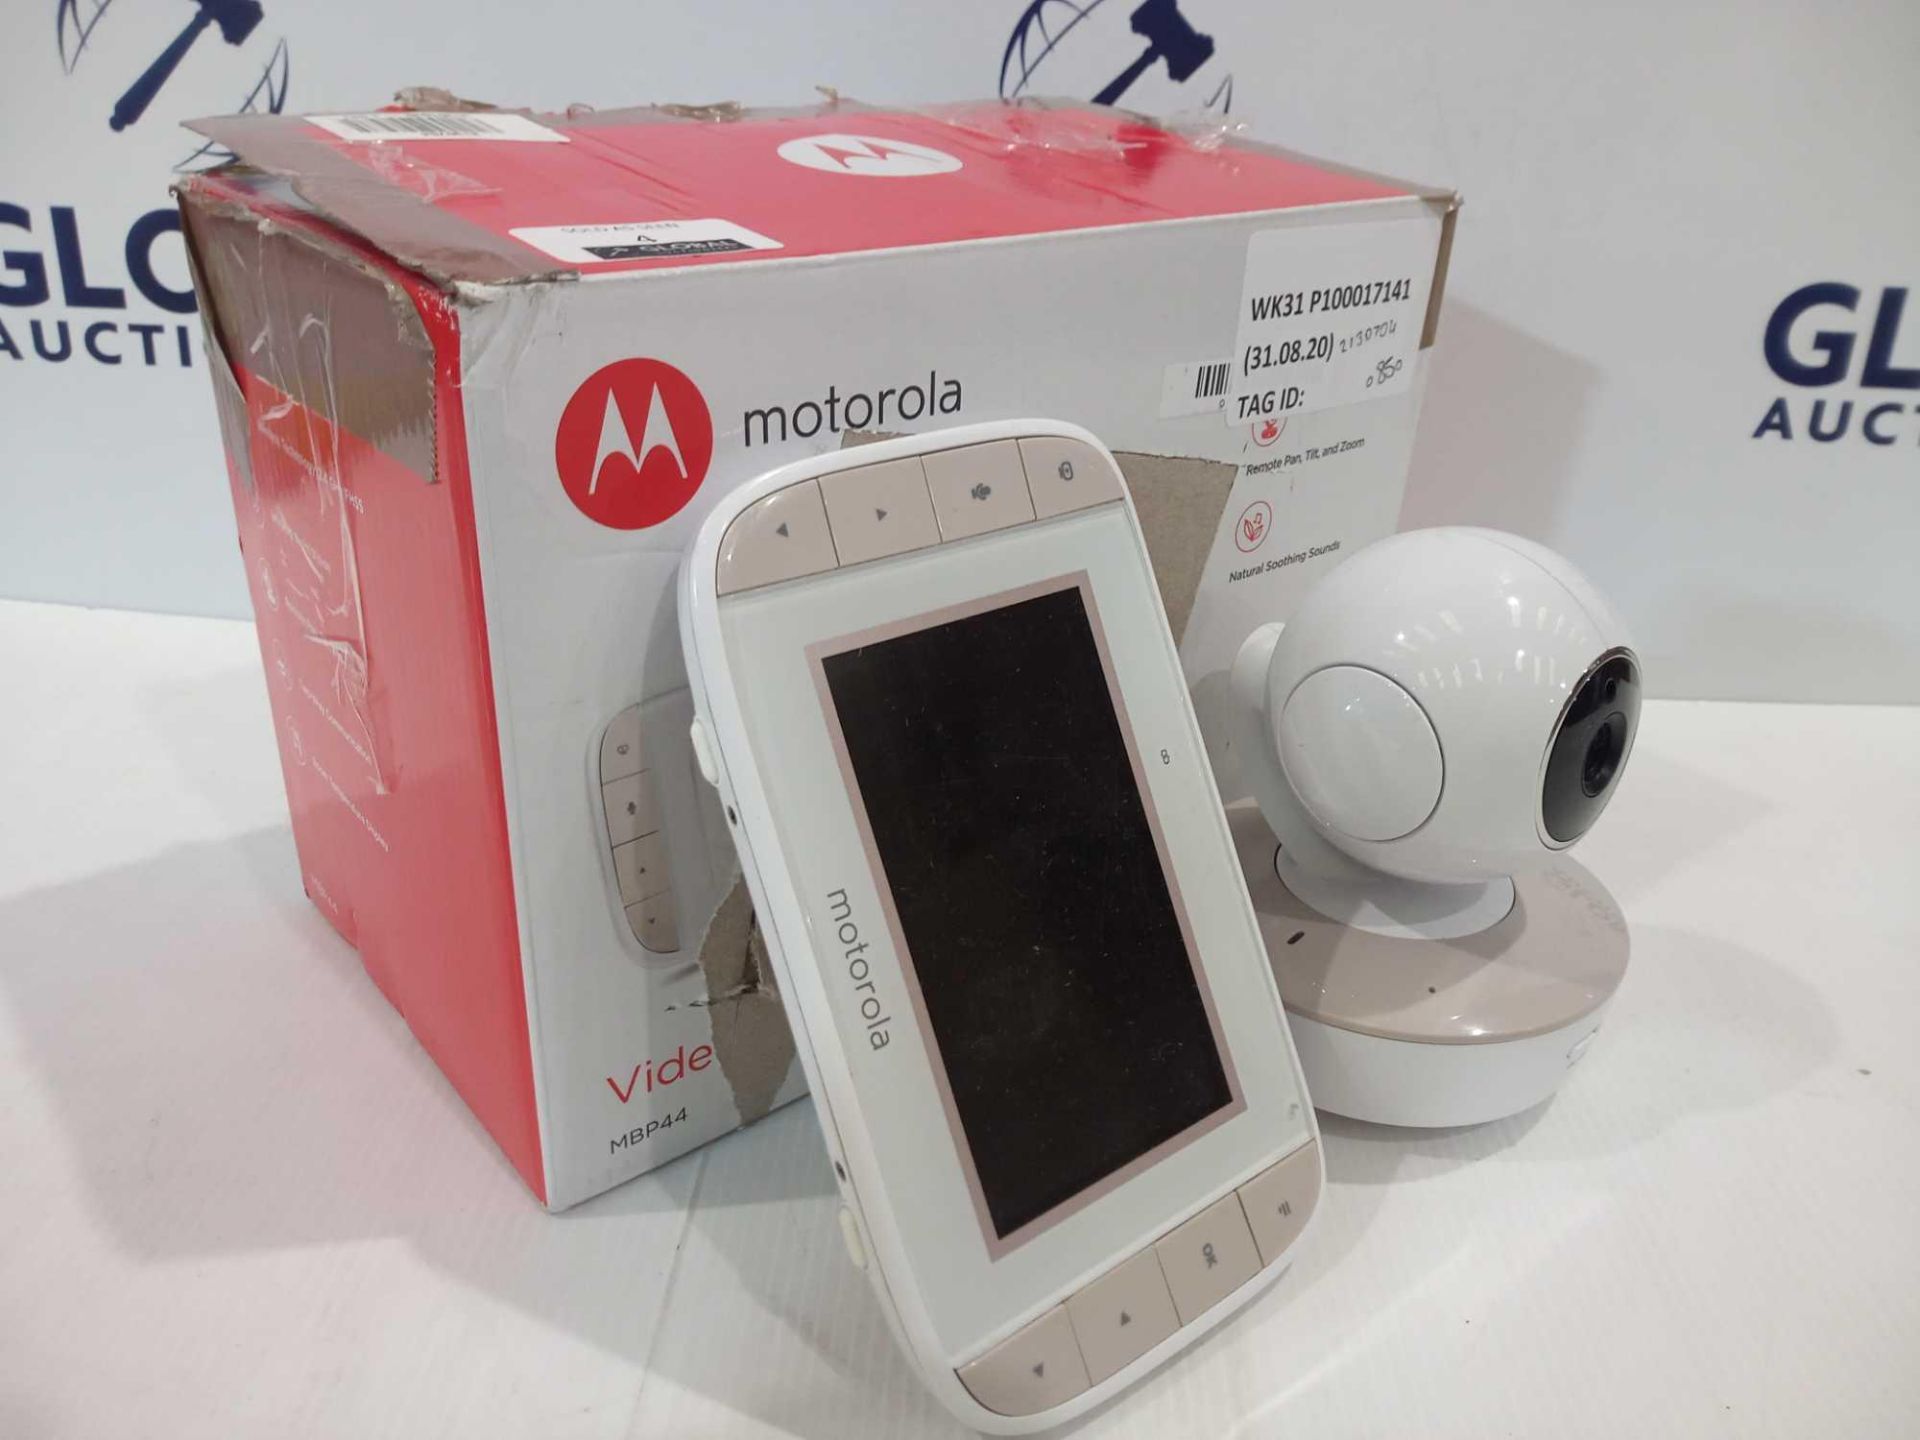 RRP £85 Boxed Motorola Mbp44 4Digital Video Baby Monitor Set With A 4.3 In Colour Screen And Two-Way